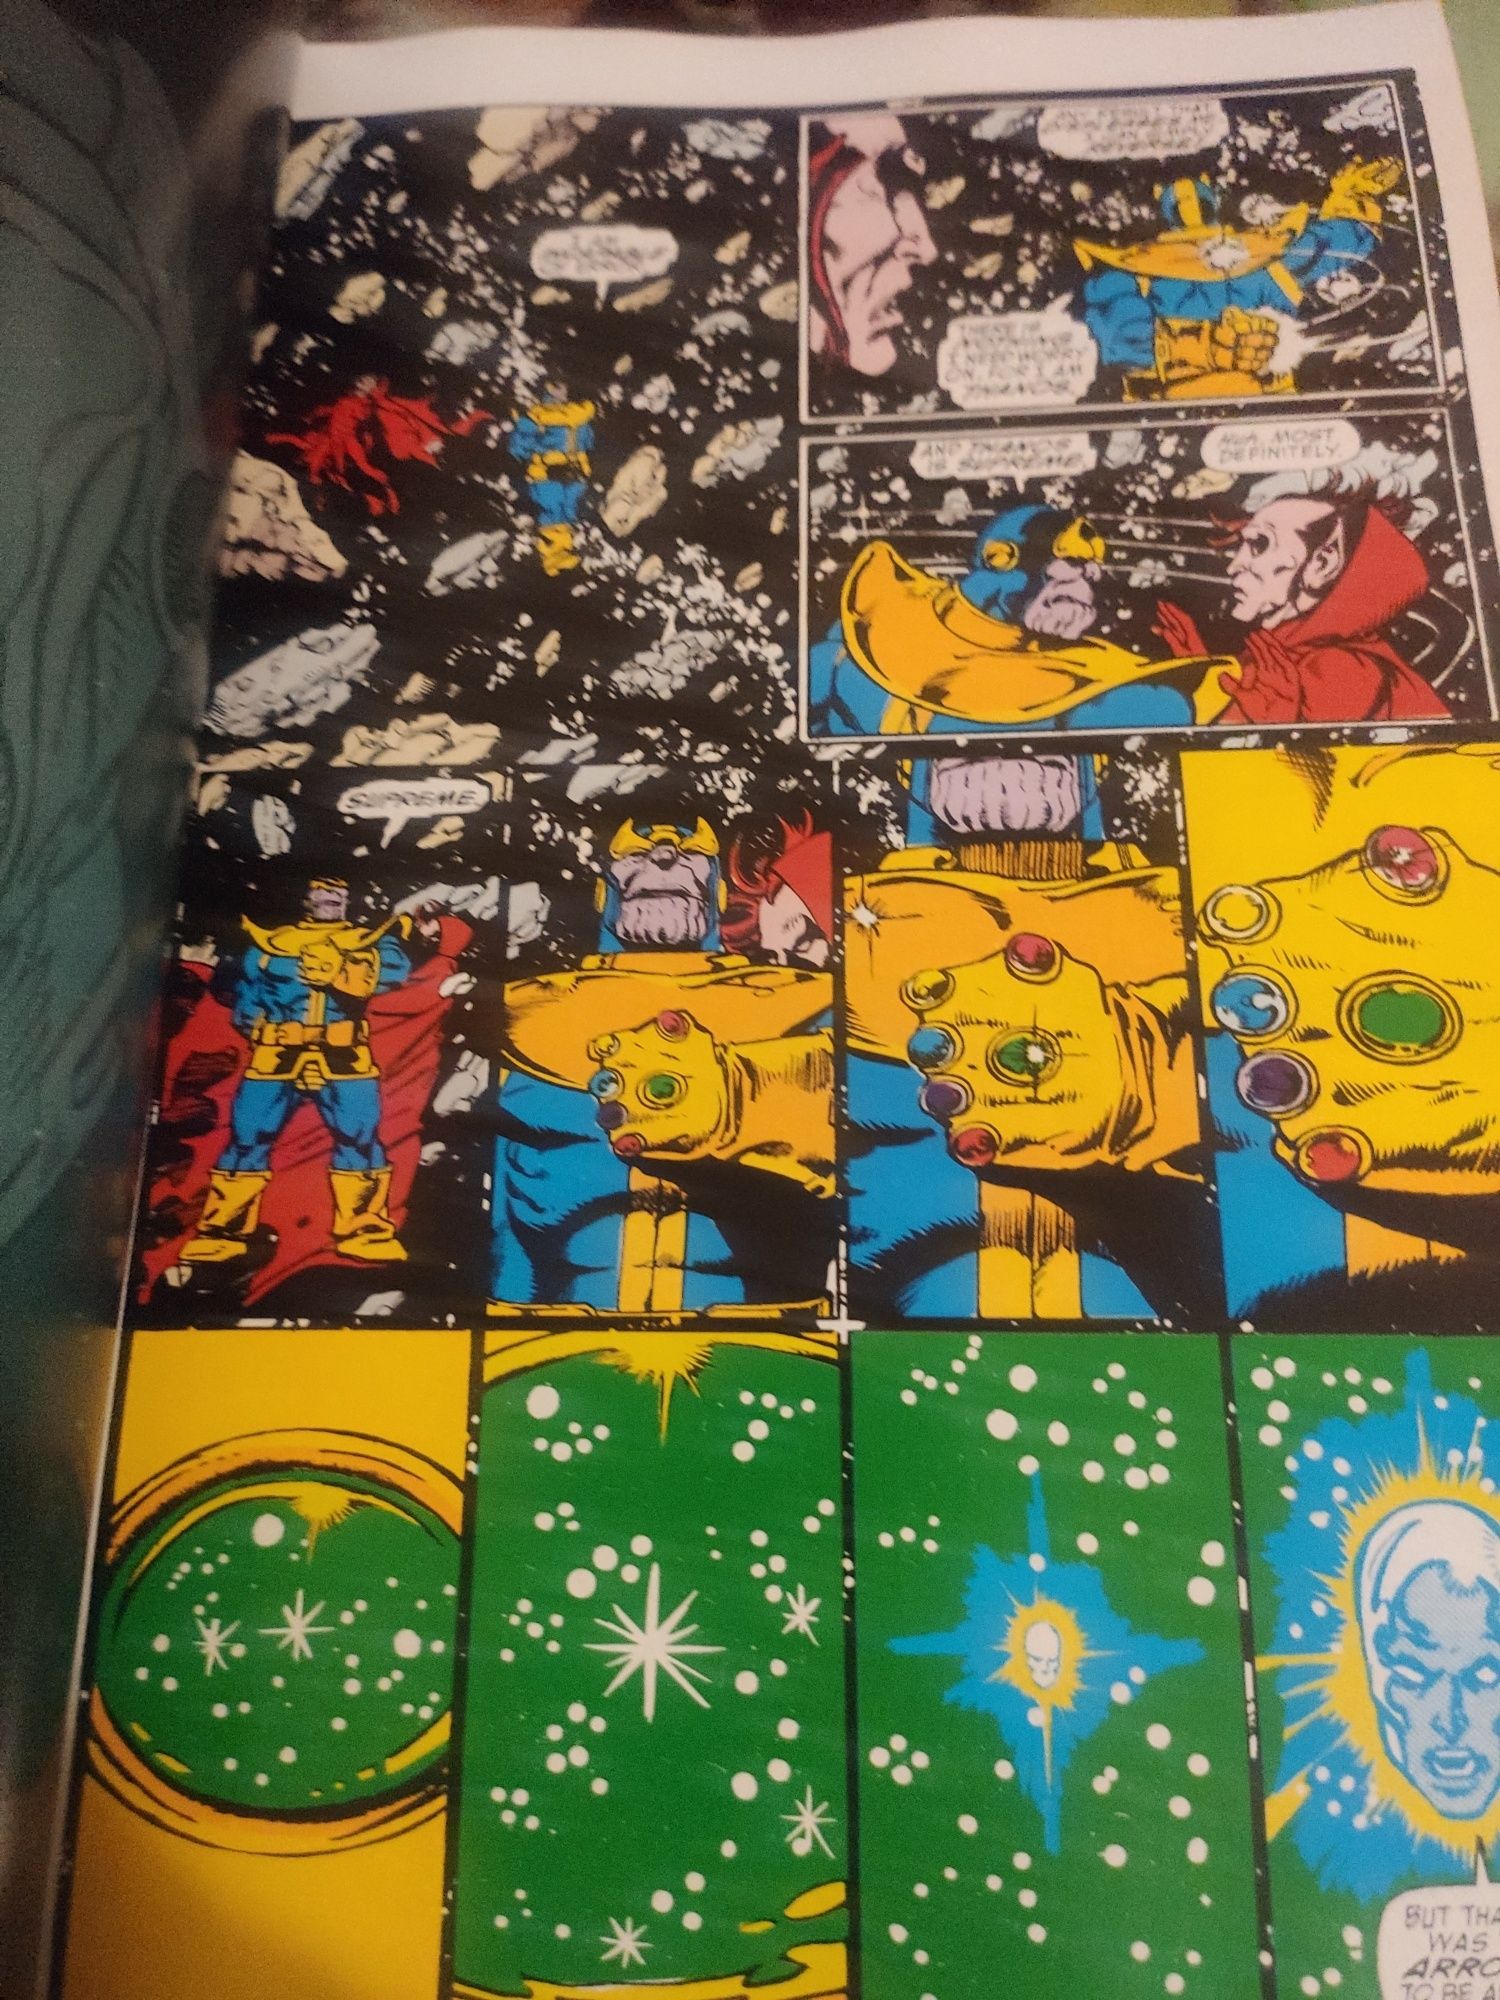 Marvel- A manopla do infinito - The infinity gauntlet